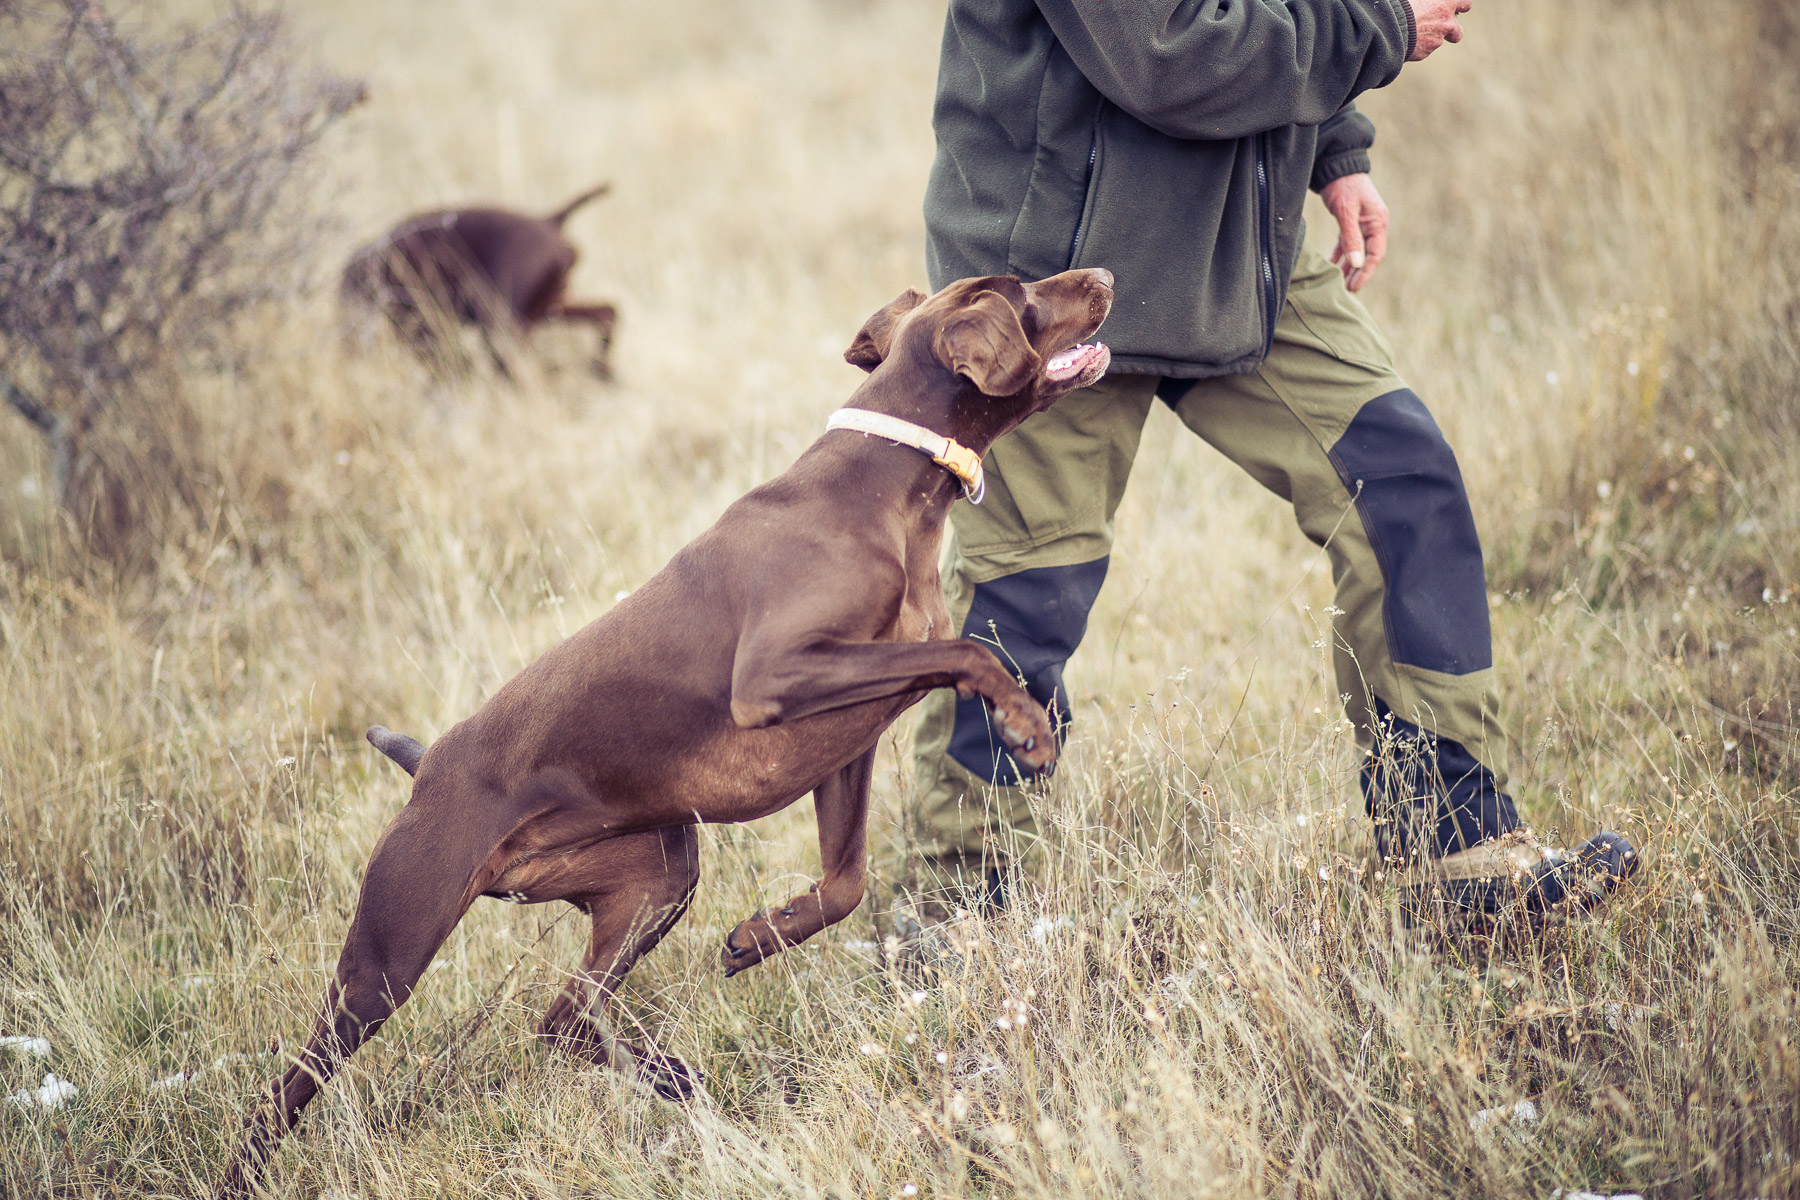 8dog-lifestyle-photographer-hunter-dogs-fetching-pheasants-nature-outdoors-bloodhounts-.jpg